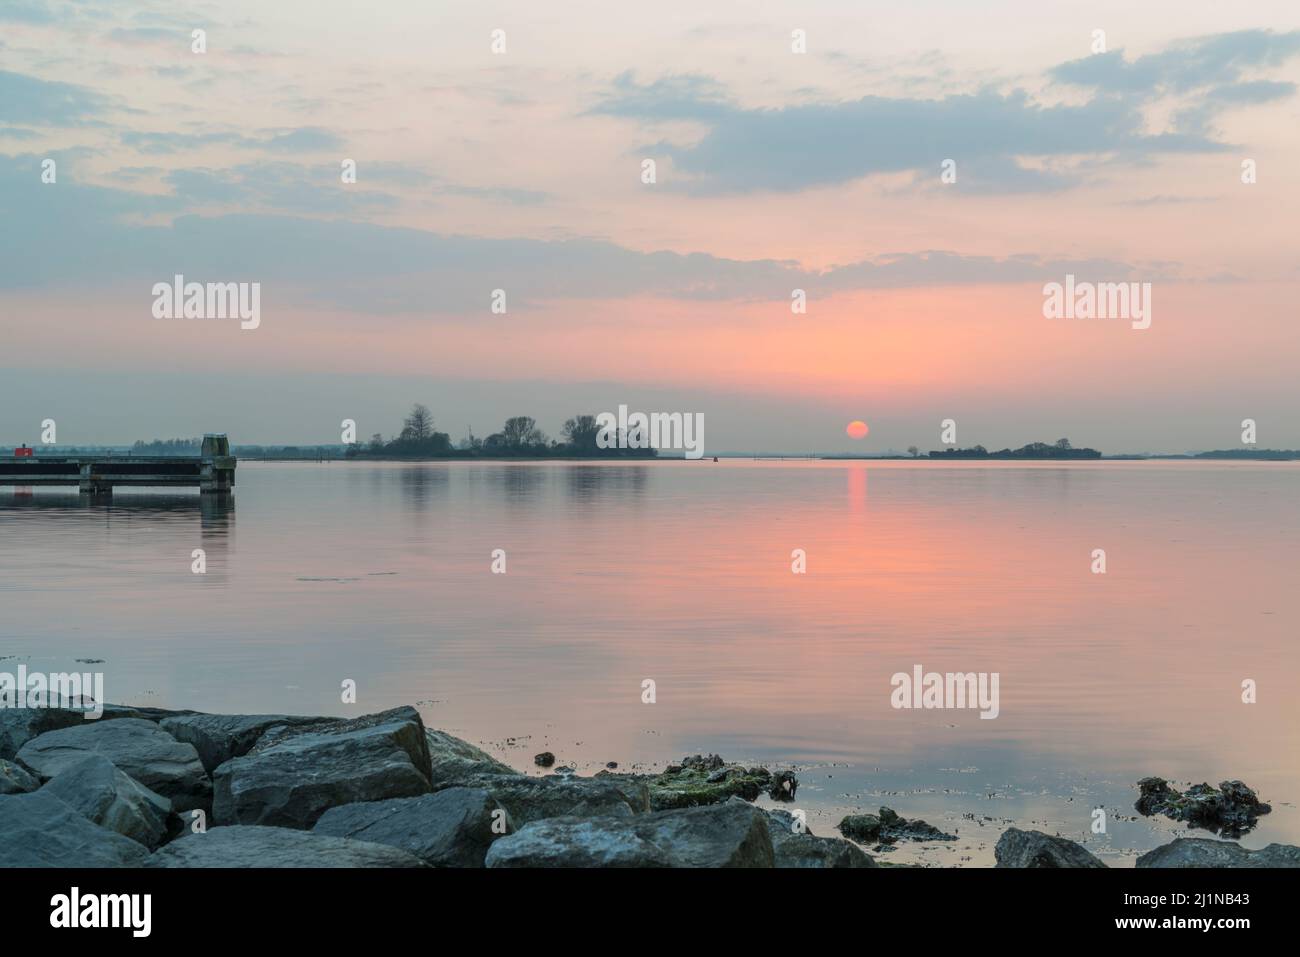 Sunset at the Veerse Meer with reflections in the almost placid lake. Zeeland, Netherlands Stock Photo